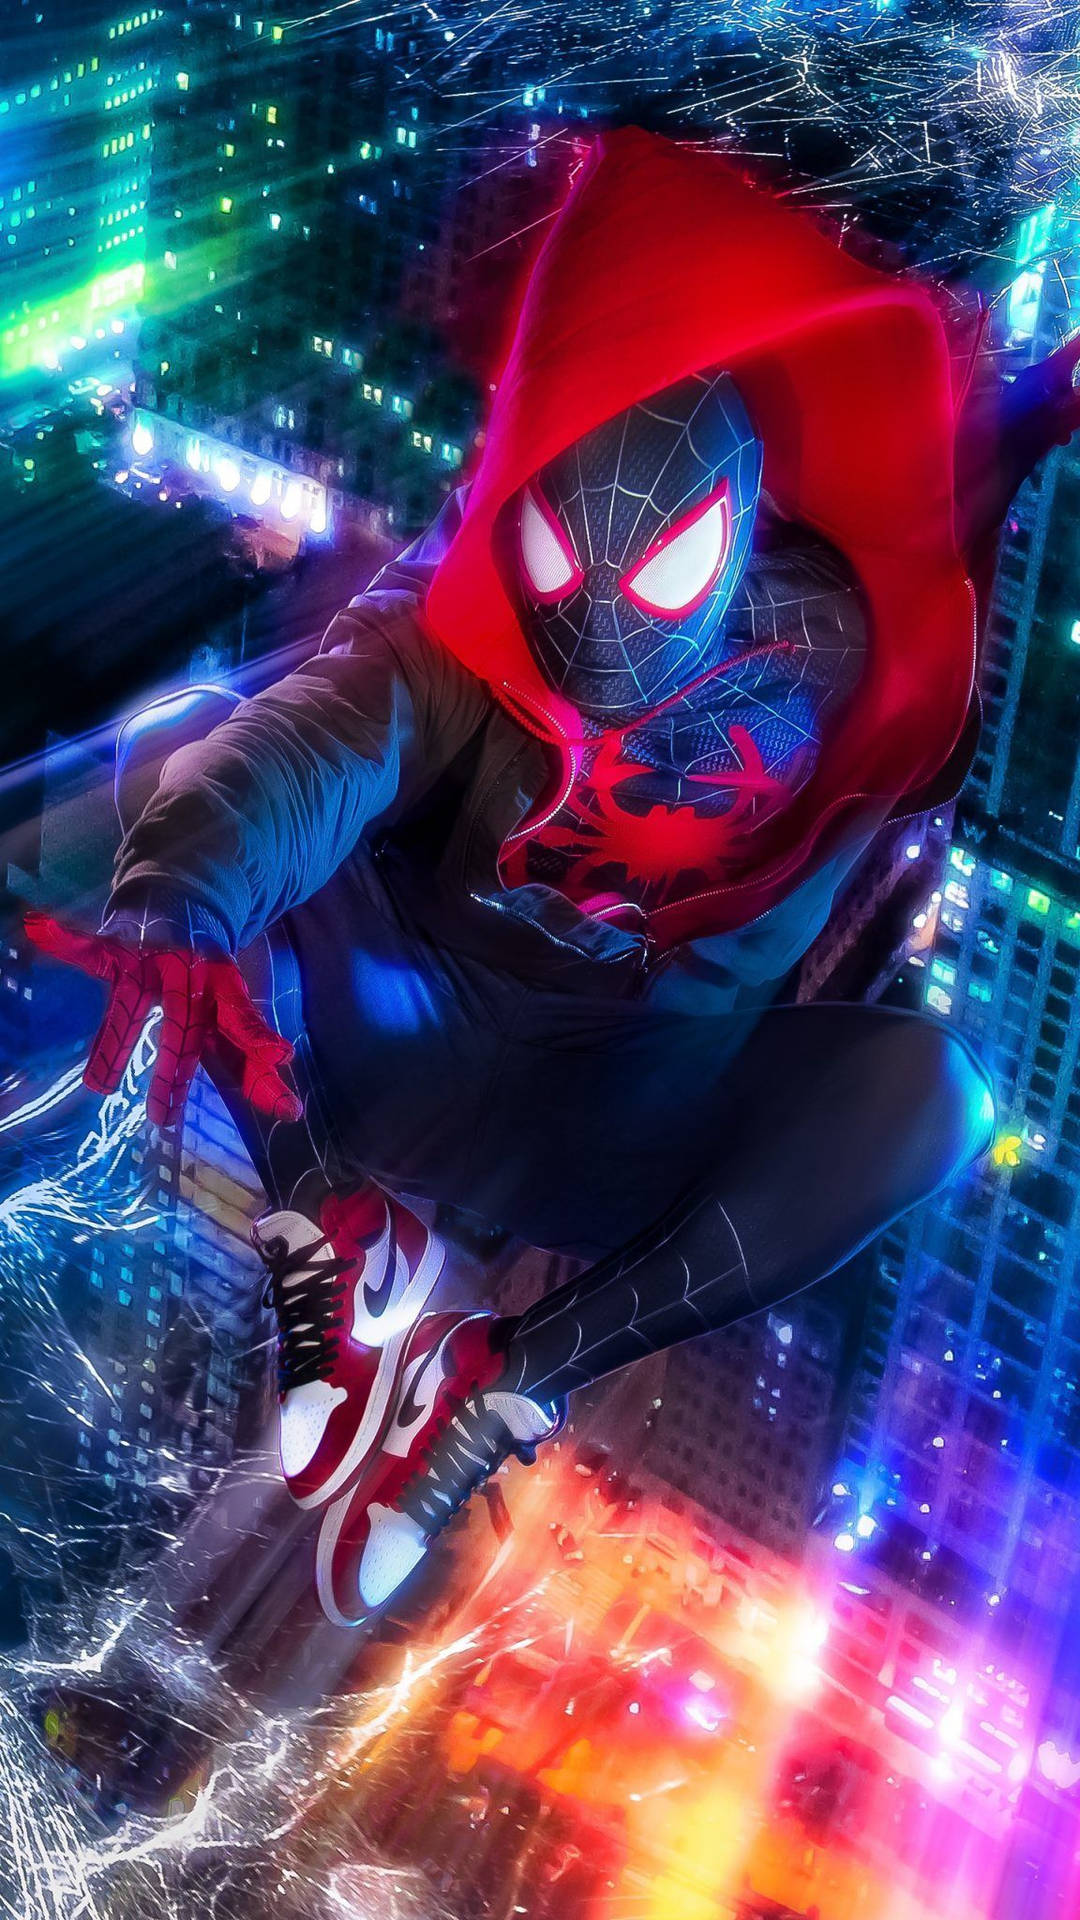 Cool SpiderMan Wallpapers and Backgrounds 4K HD Dual Screen